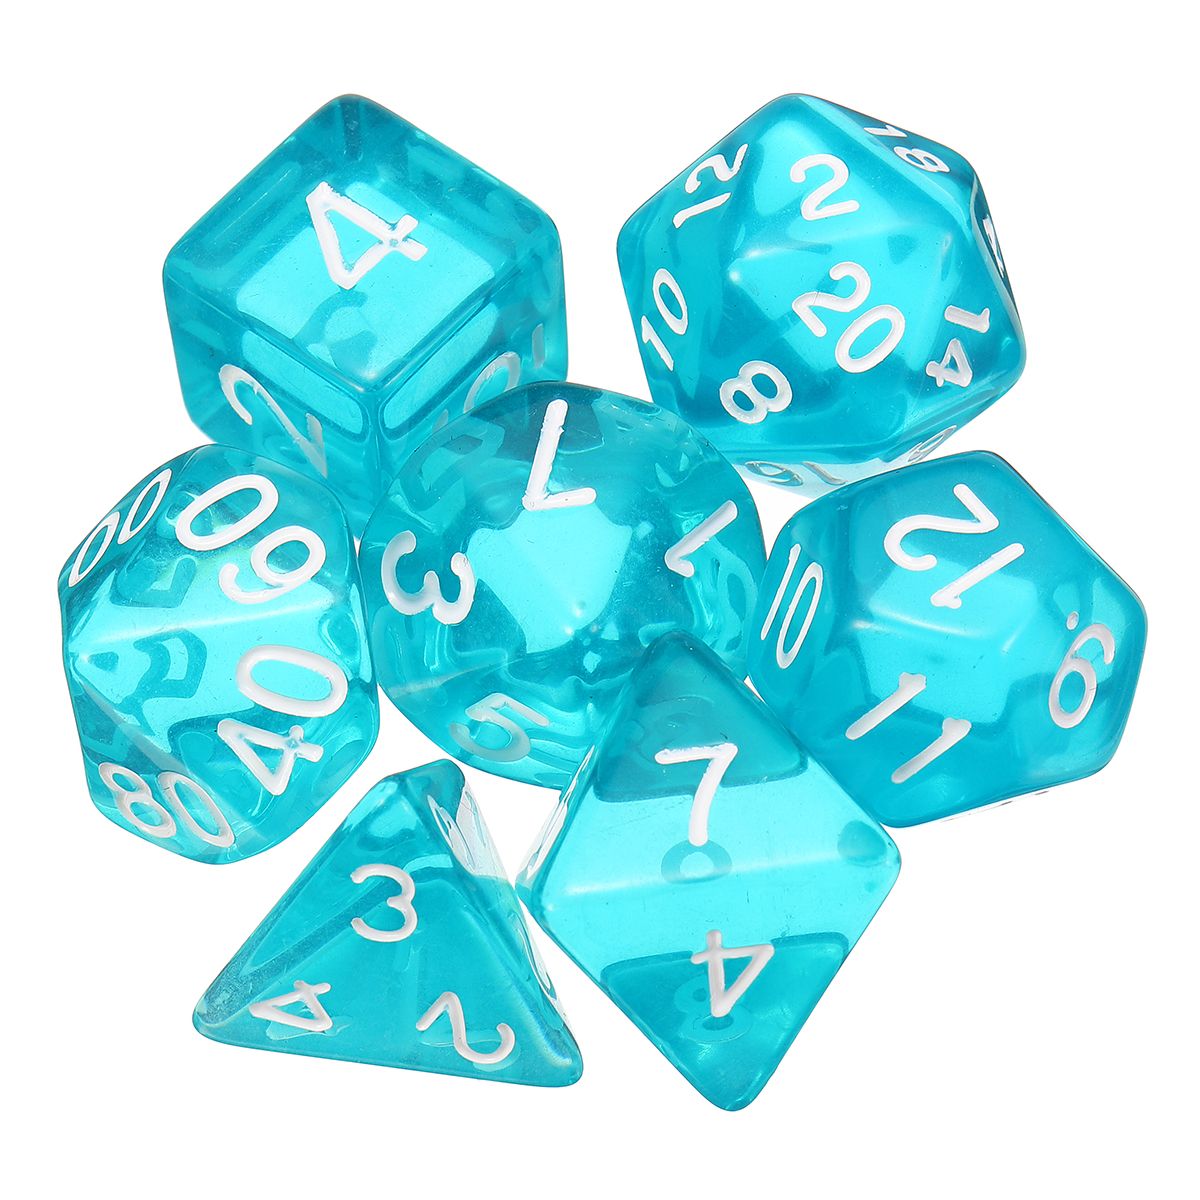 7-Pcs-Dice-Polyhedral-Dices-Set-Translucent-RPG-Gadget-Multisided-Dice-With-Bag-1360640